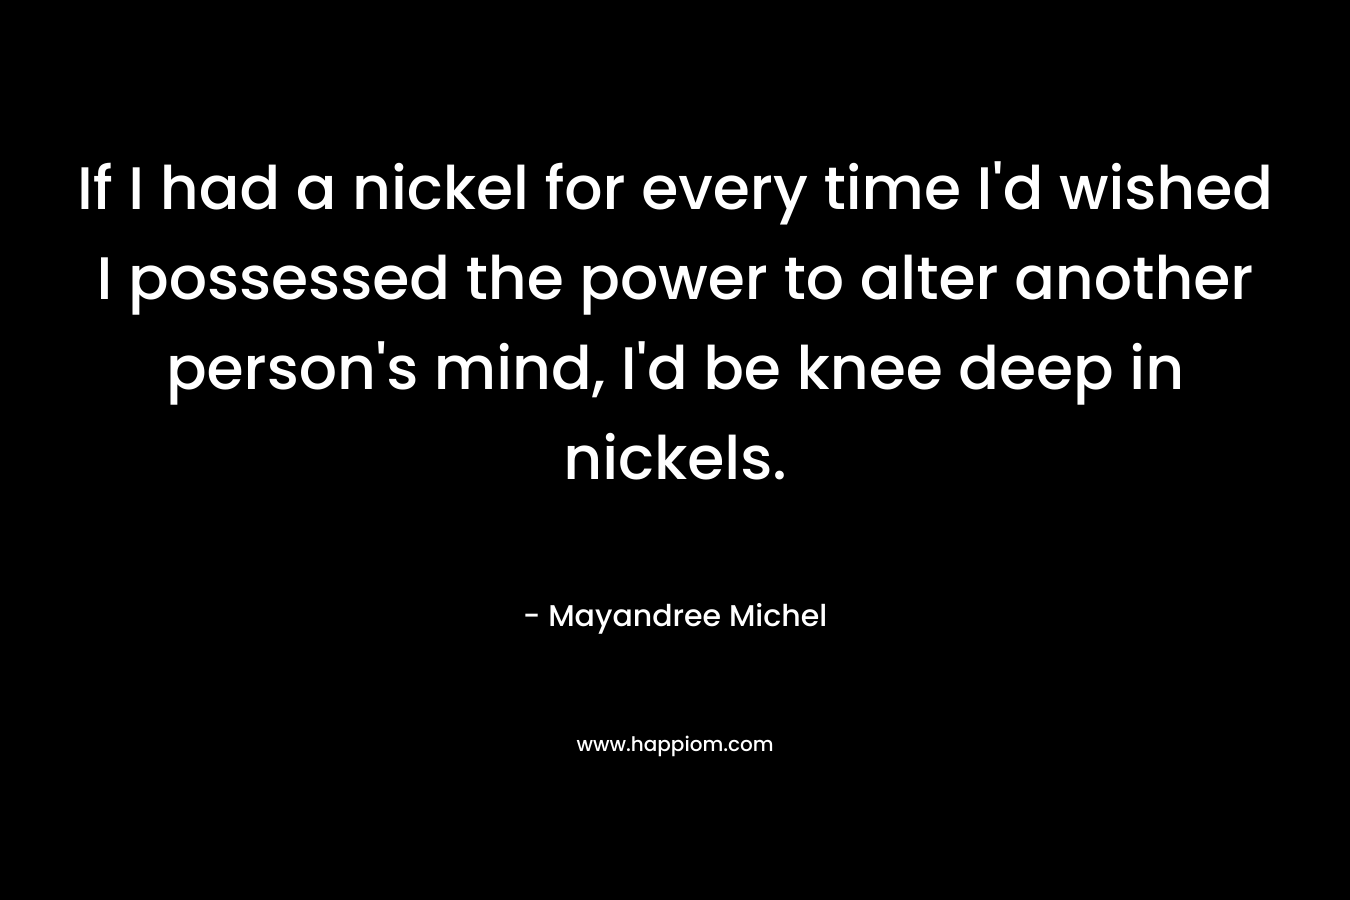 If I had a nickel for every time I'd wished I possessed the power to alter another person's mind, I'd be knee deep in nickels.